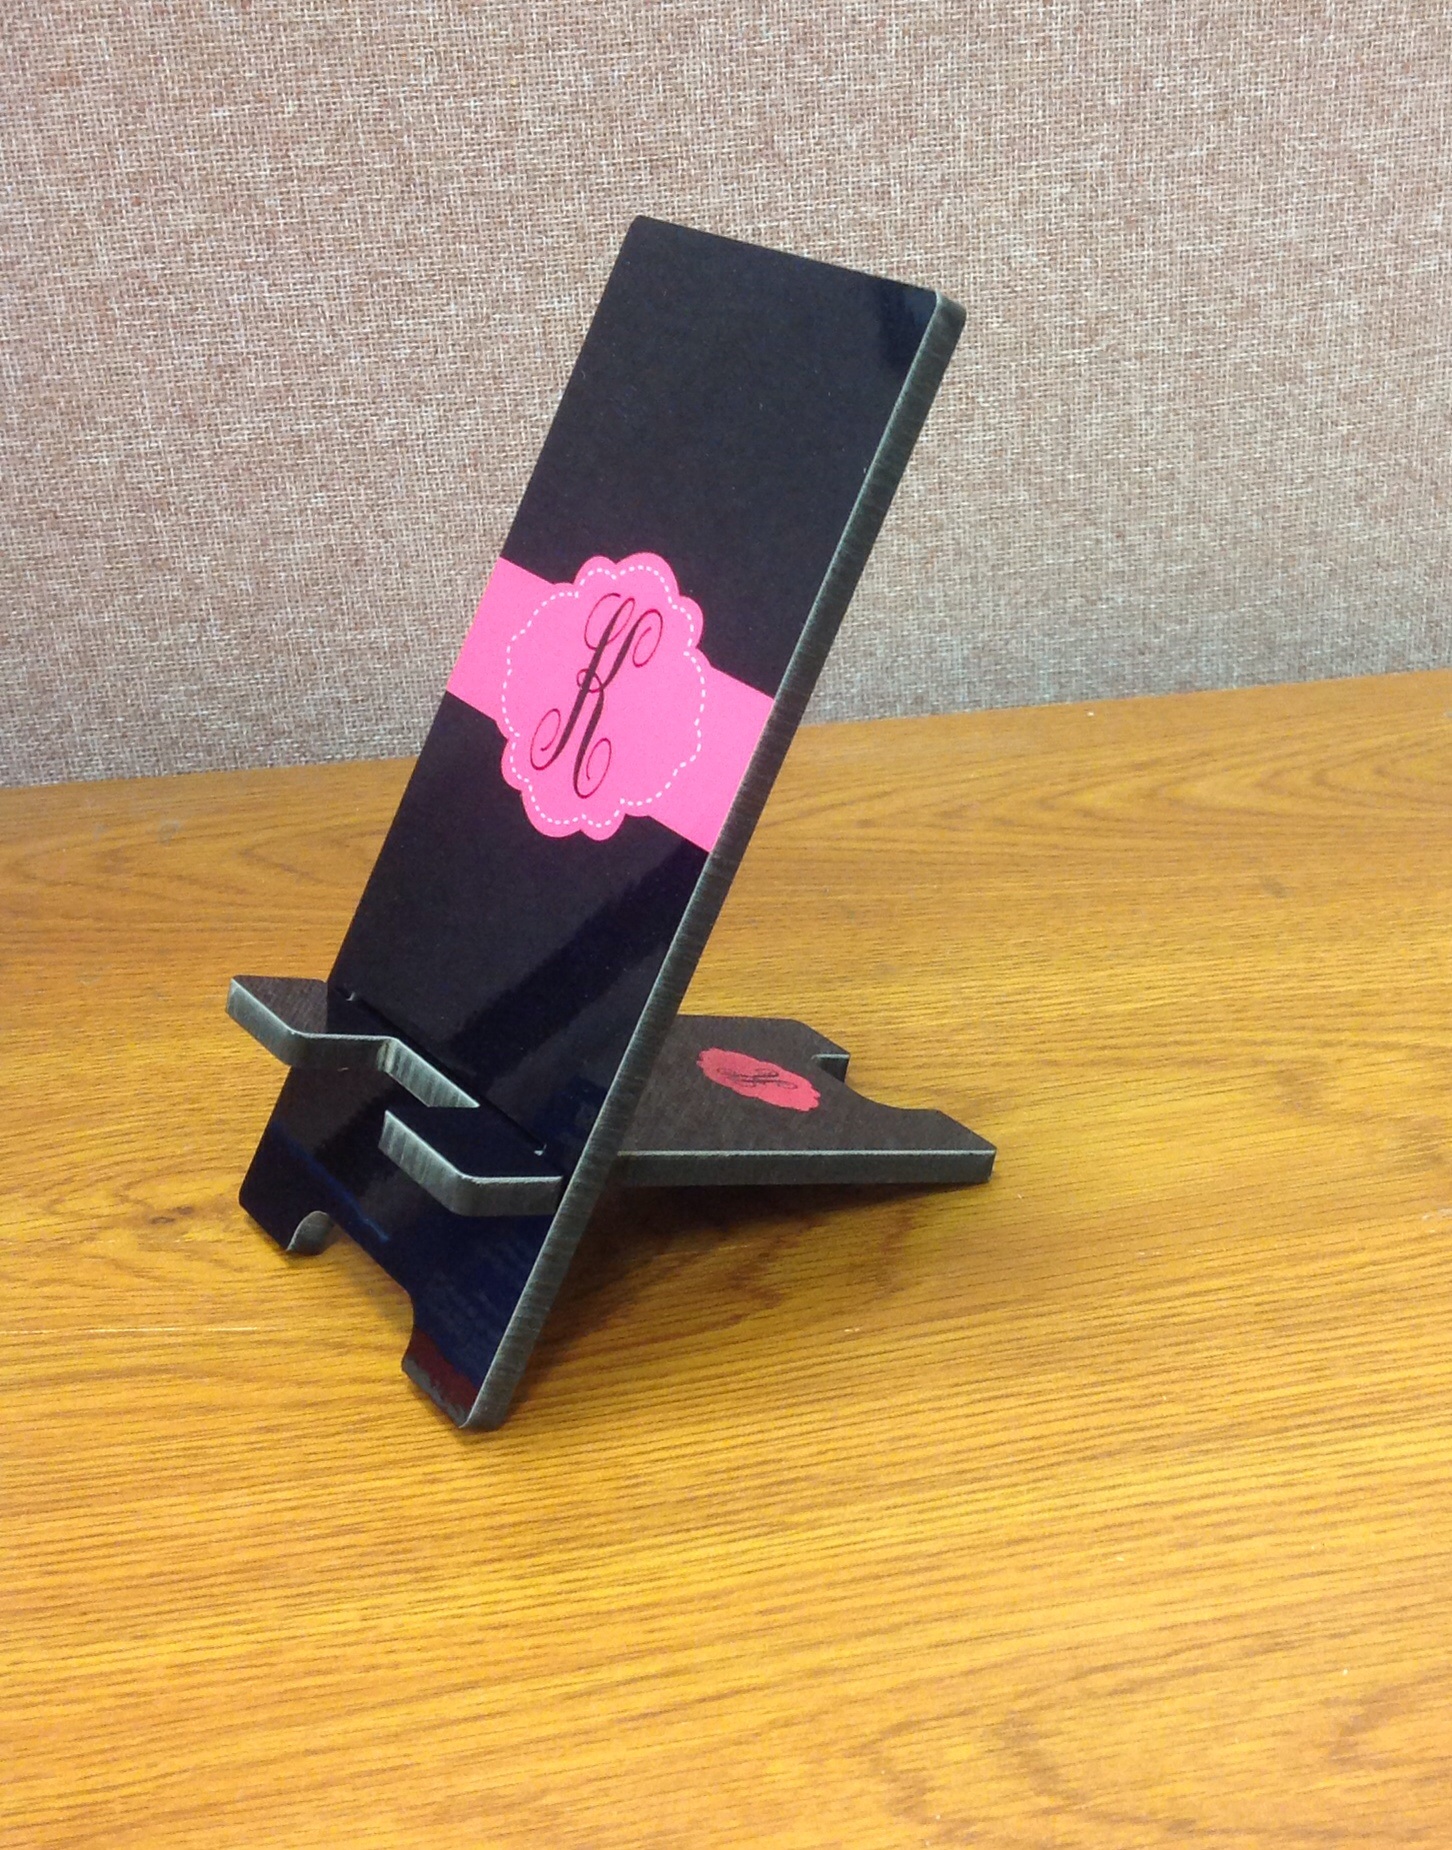 Phone Stand made with sublimation printing